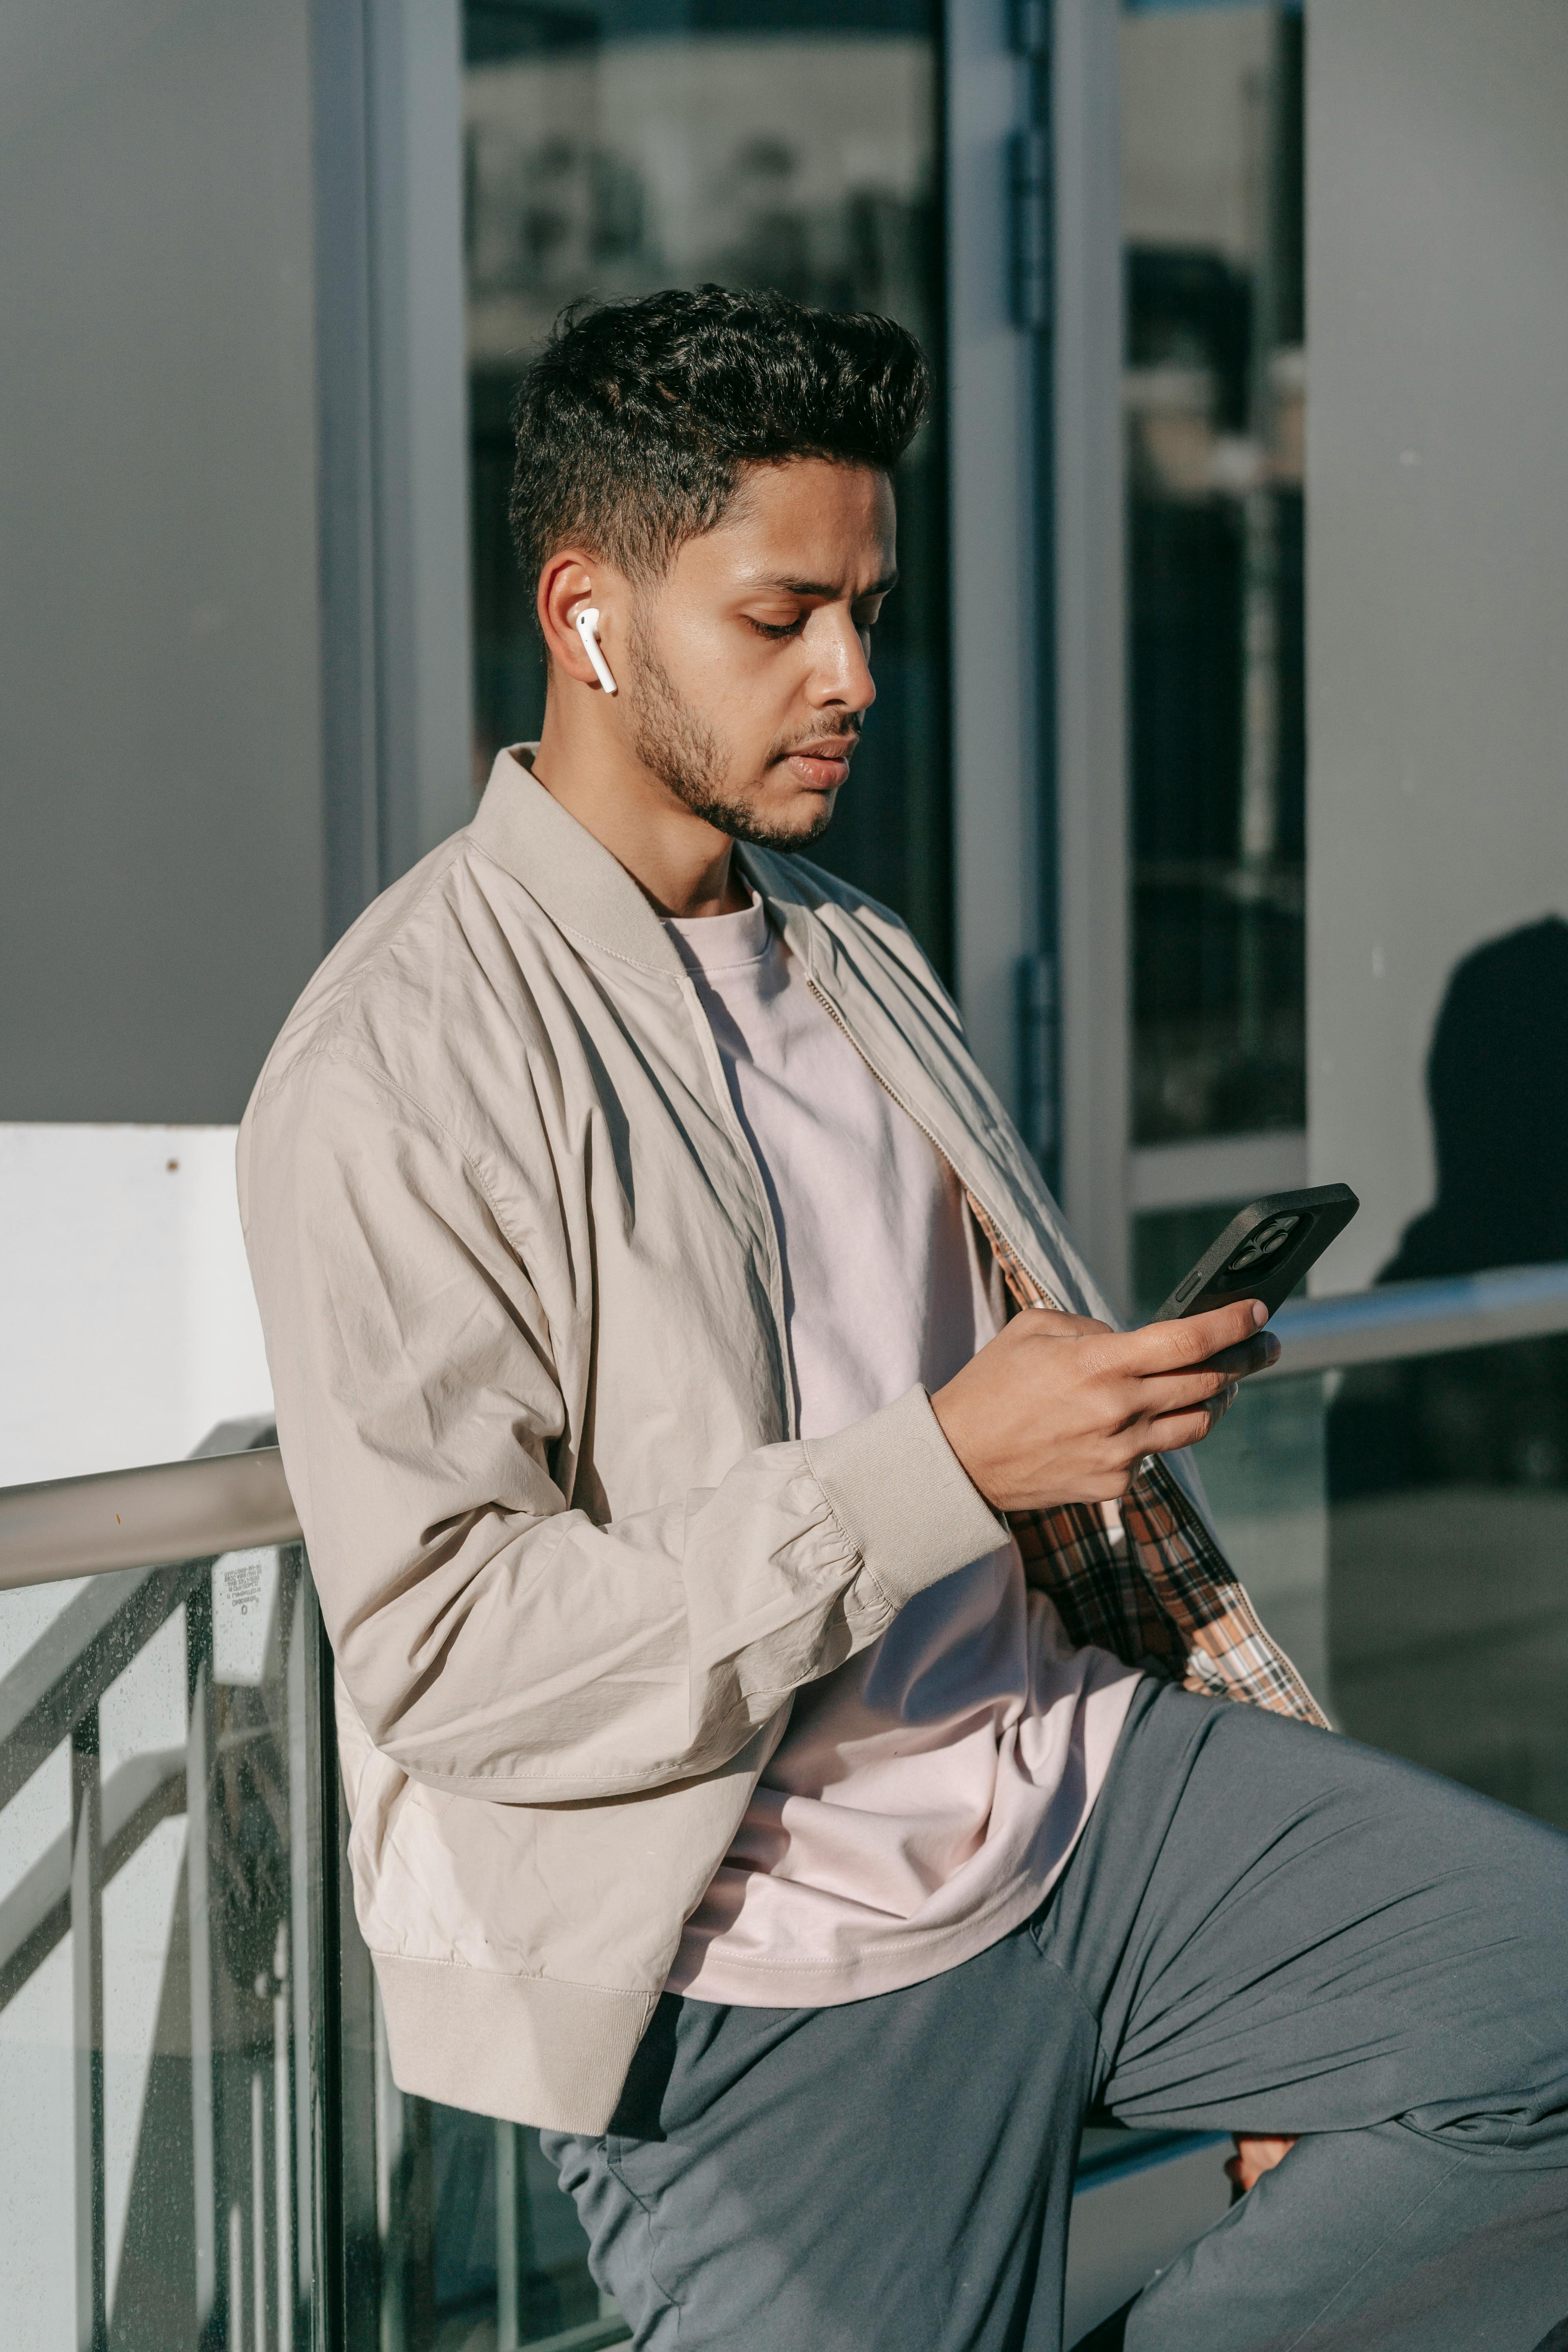 A displeased-looking man wearing ear pods while using his phone | Source: Pexels